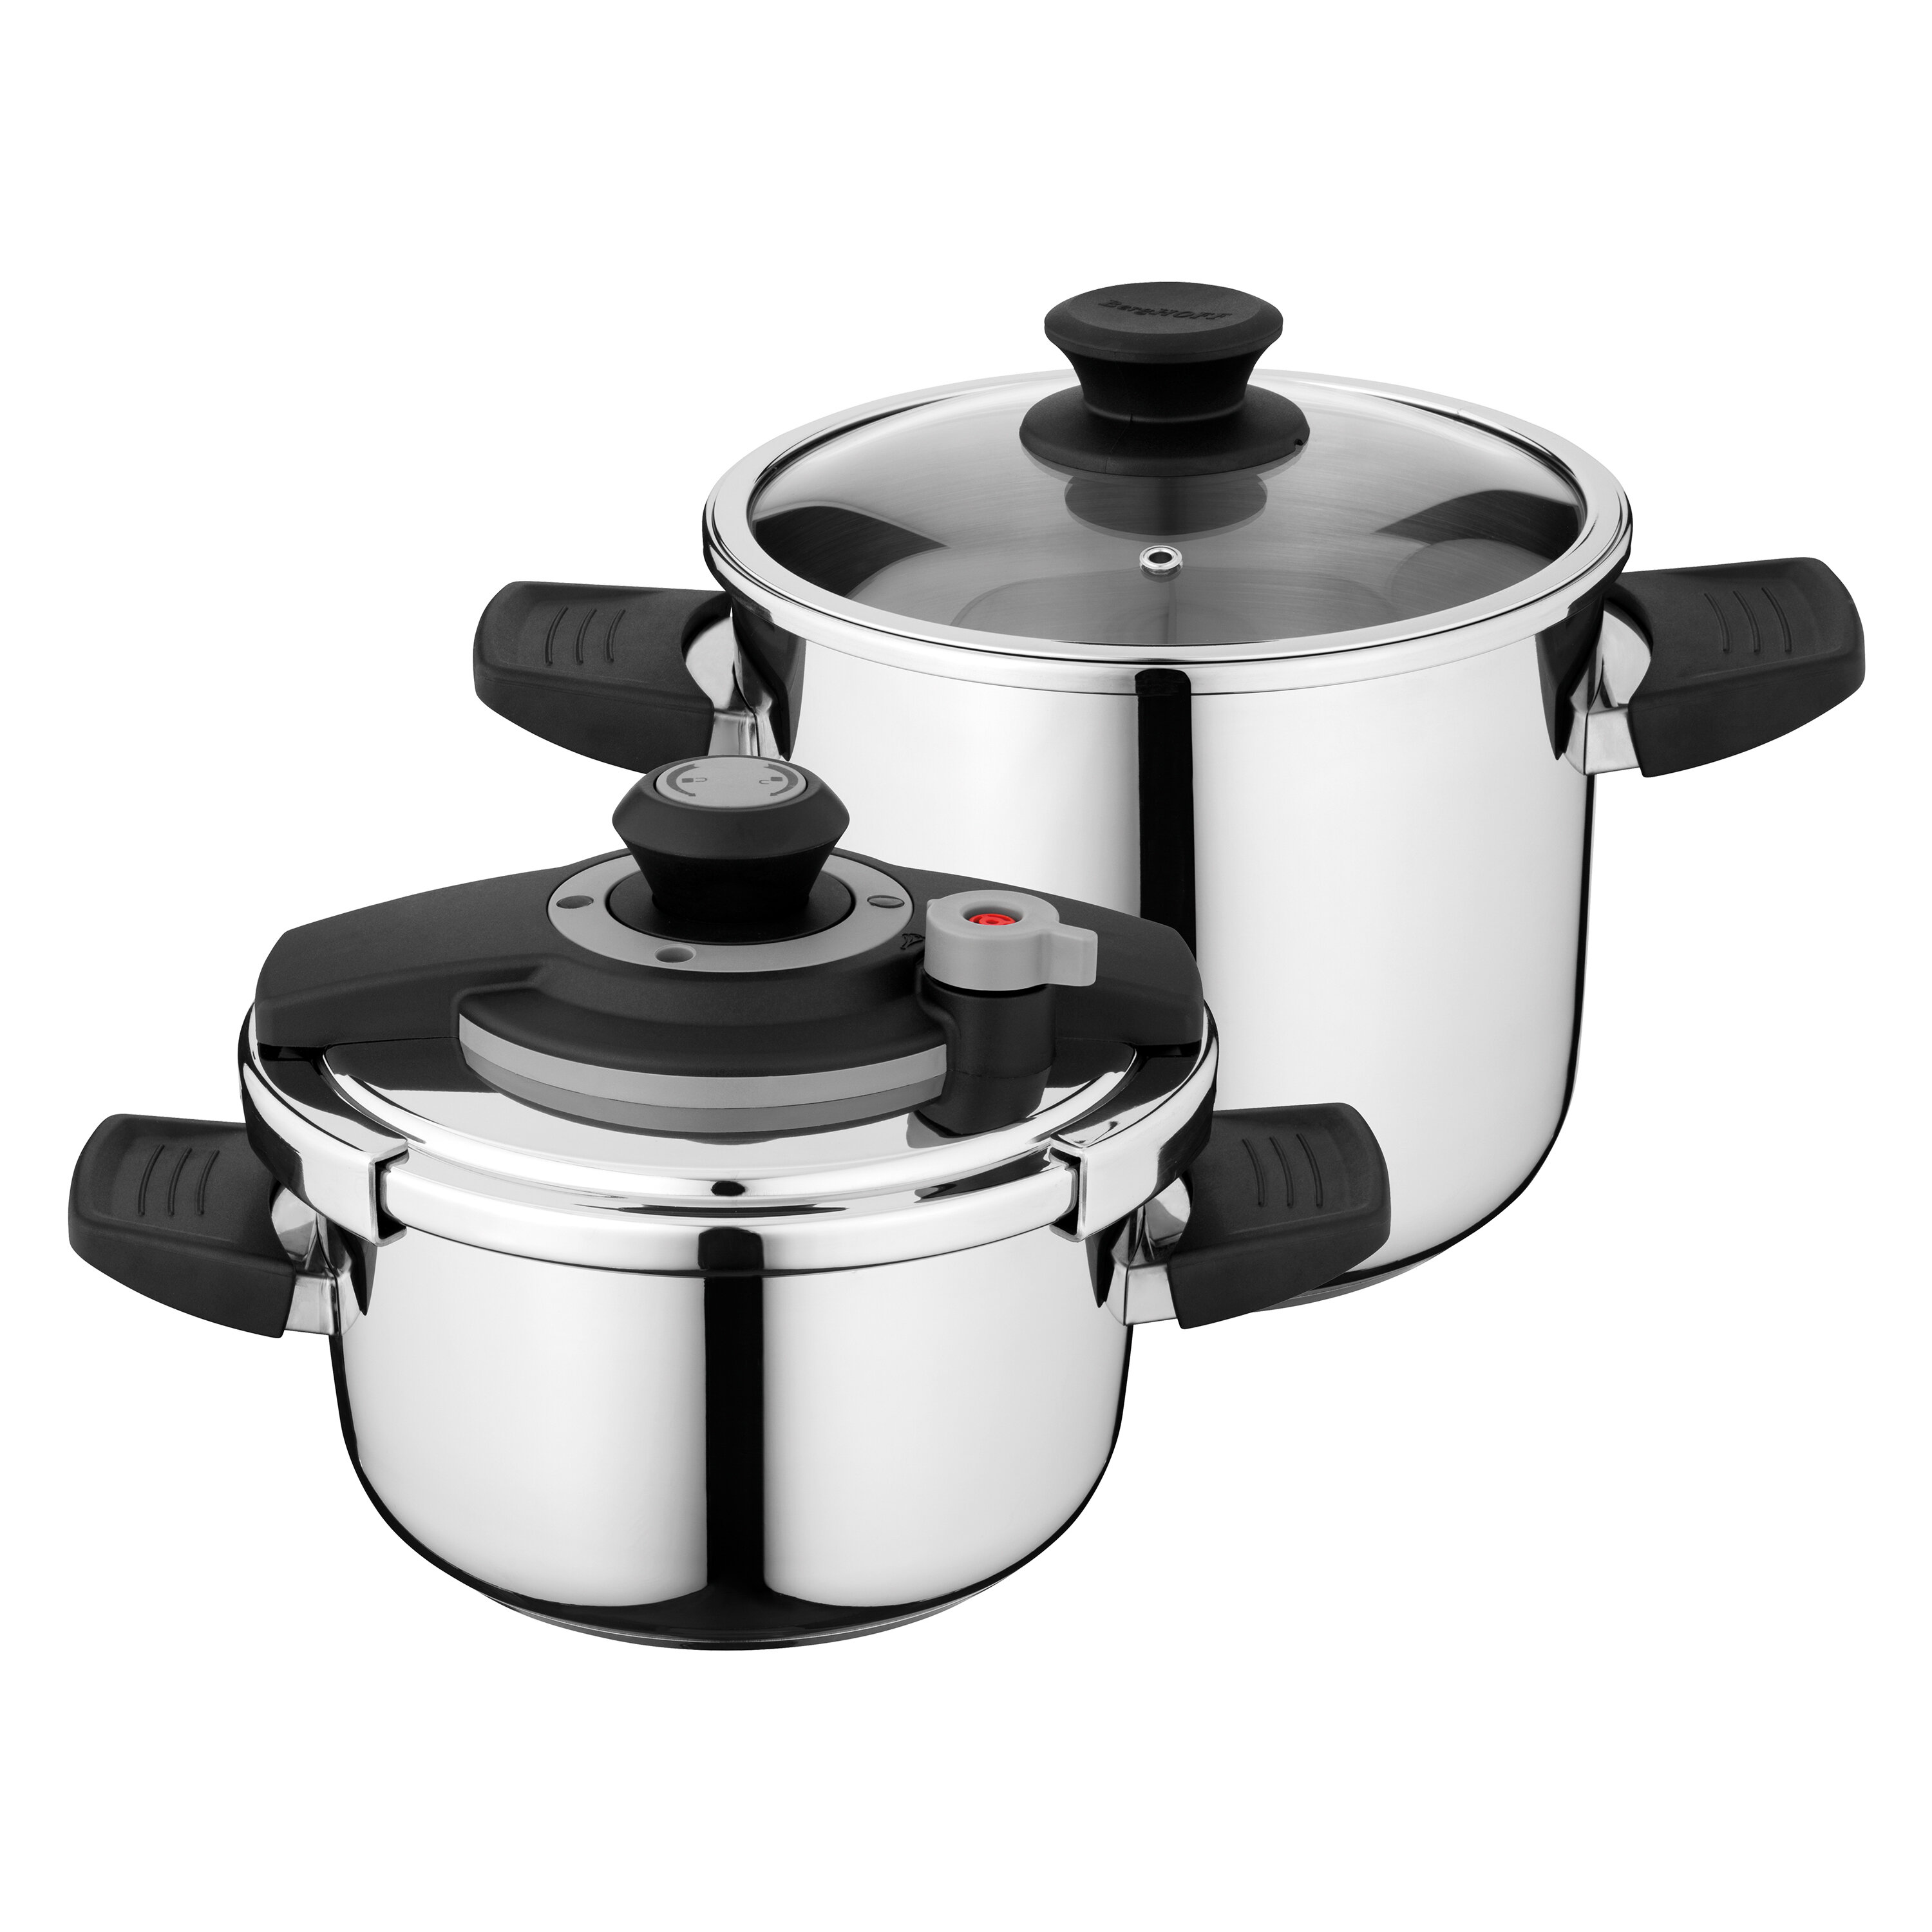 Presto 6 Qt. Stainless Steel Pressure Cooker Mod. 0124001 / Made In USA